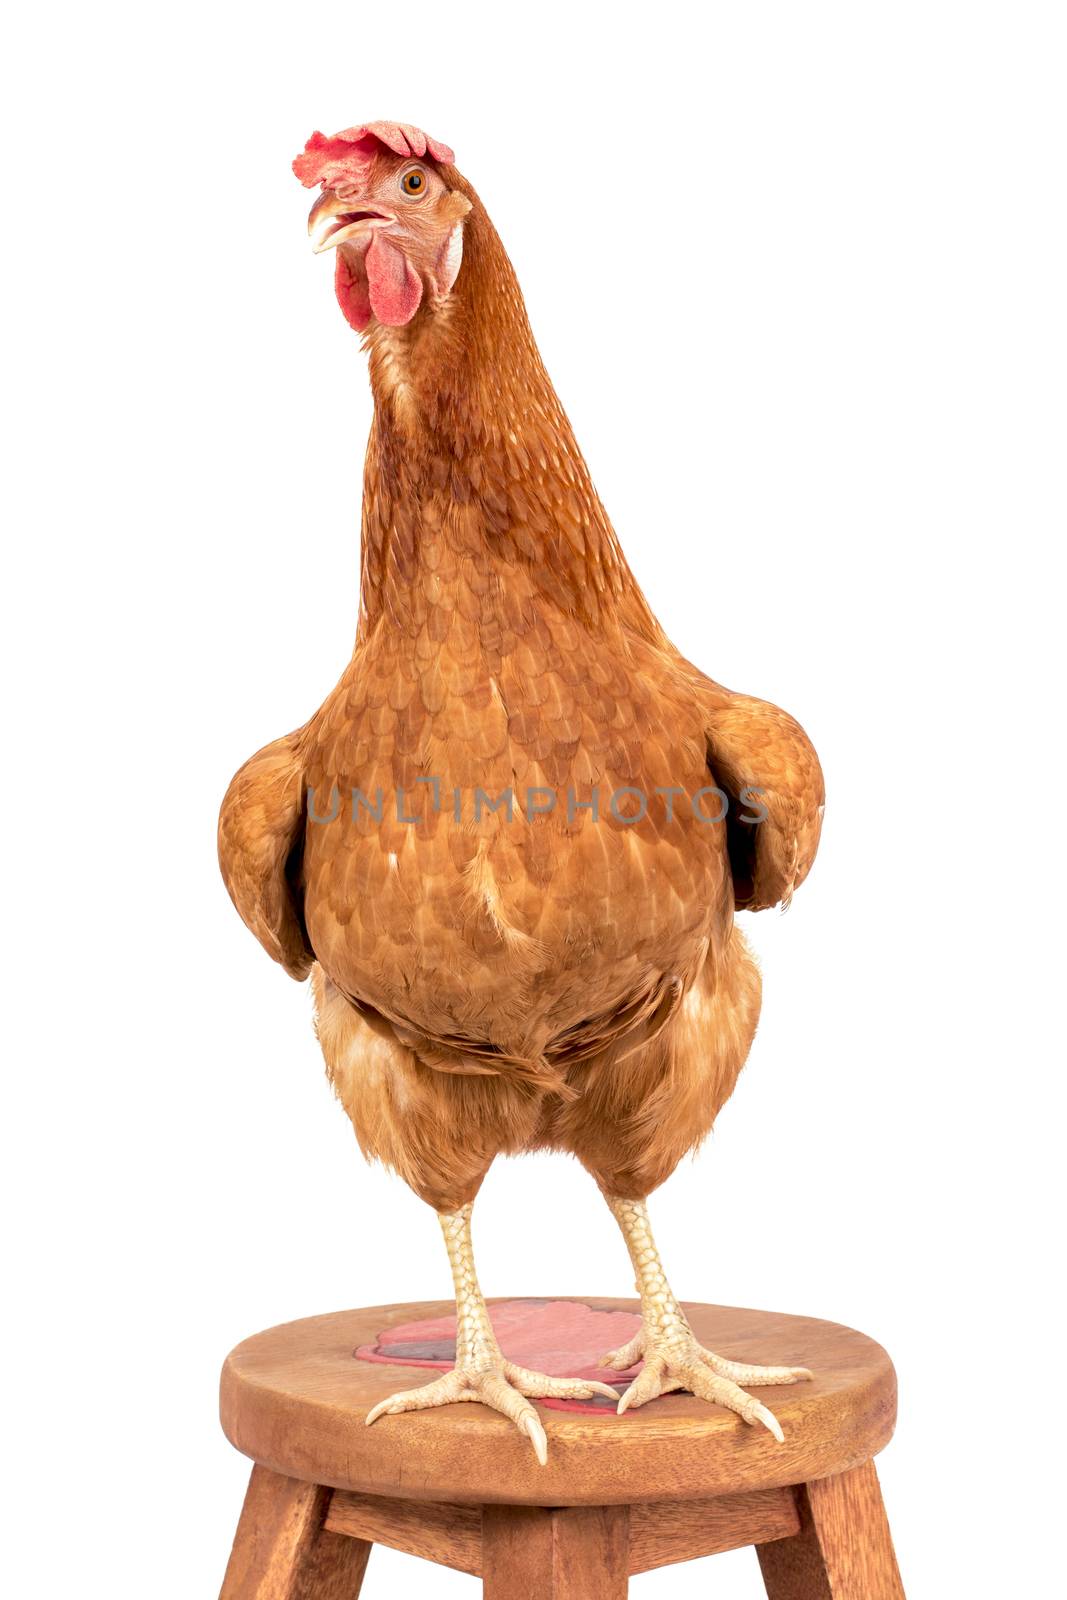 rooster standing on wood path isolated white background